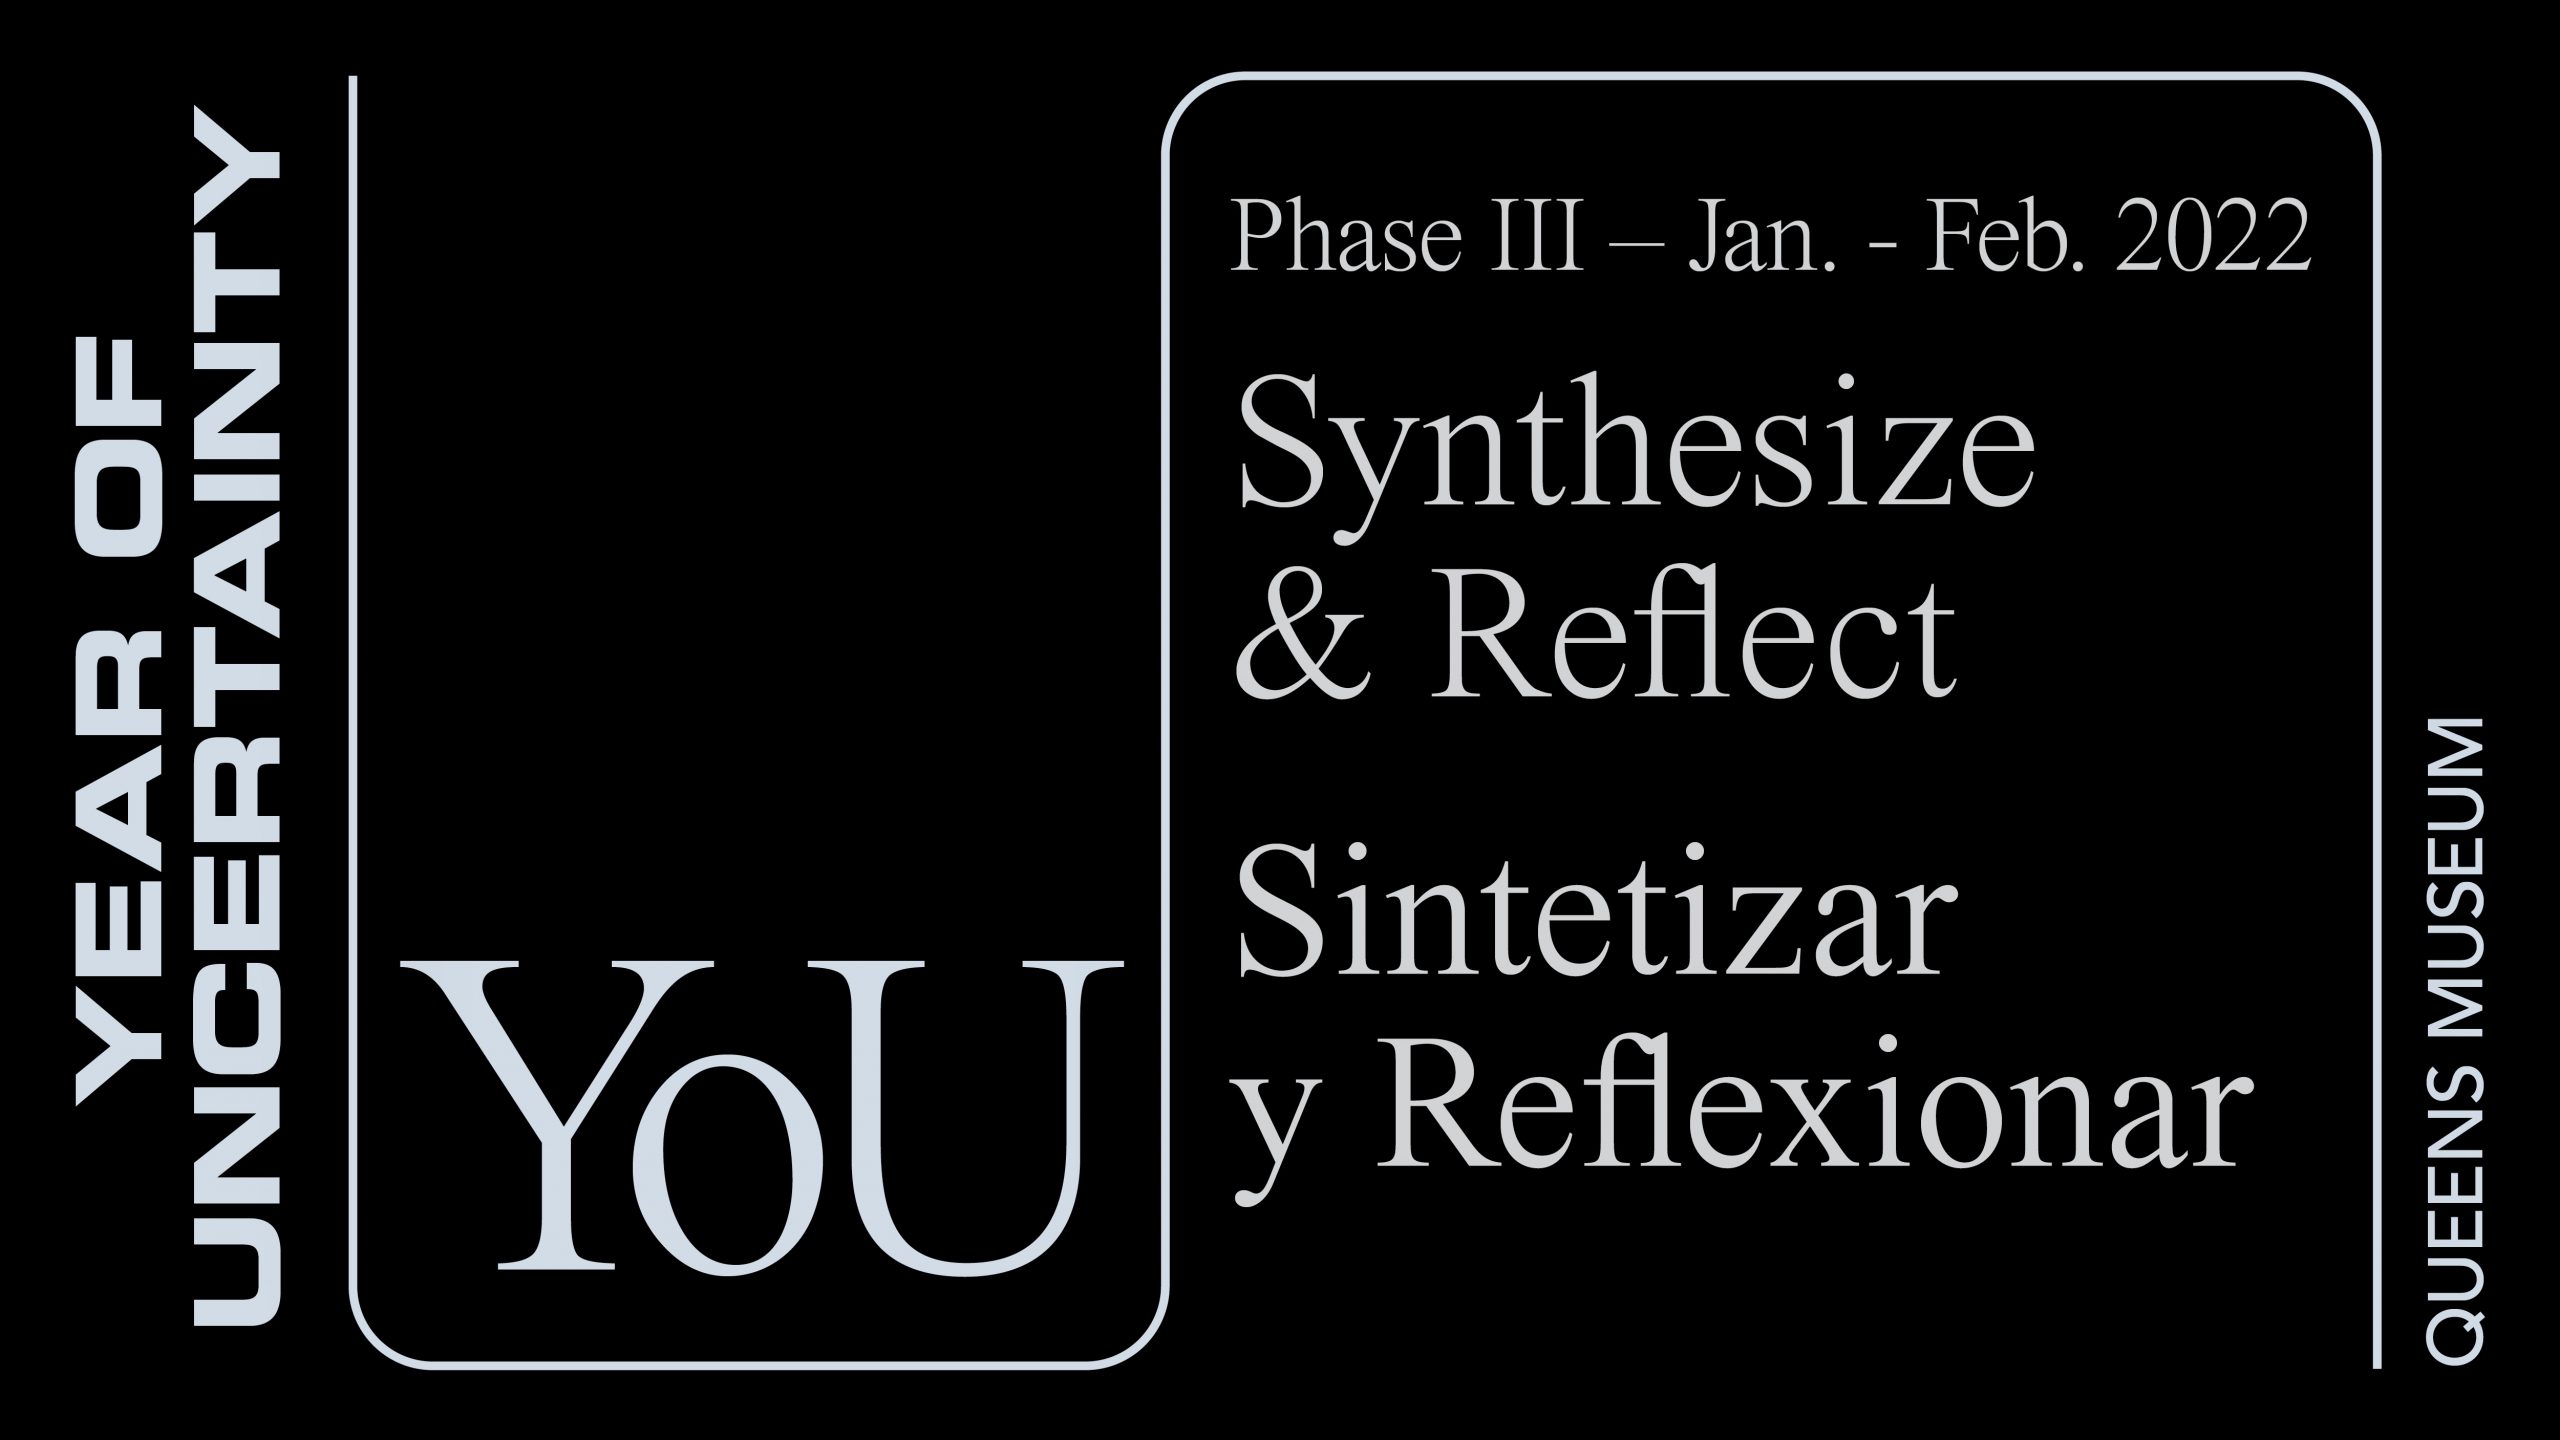 White text on black background that reads Year of Uncertainty, YoU, Phase 3 , Jan to Feb 2022, Syntehsize and Reflect, Sintetizar y Reflexionar.